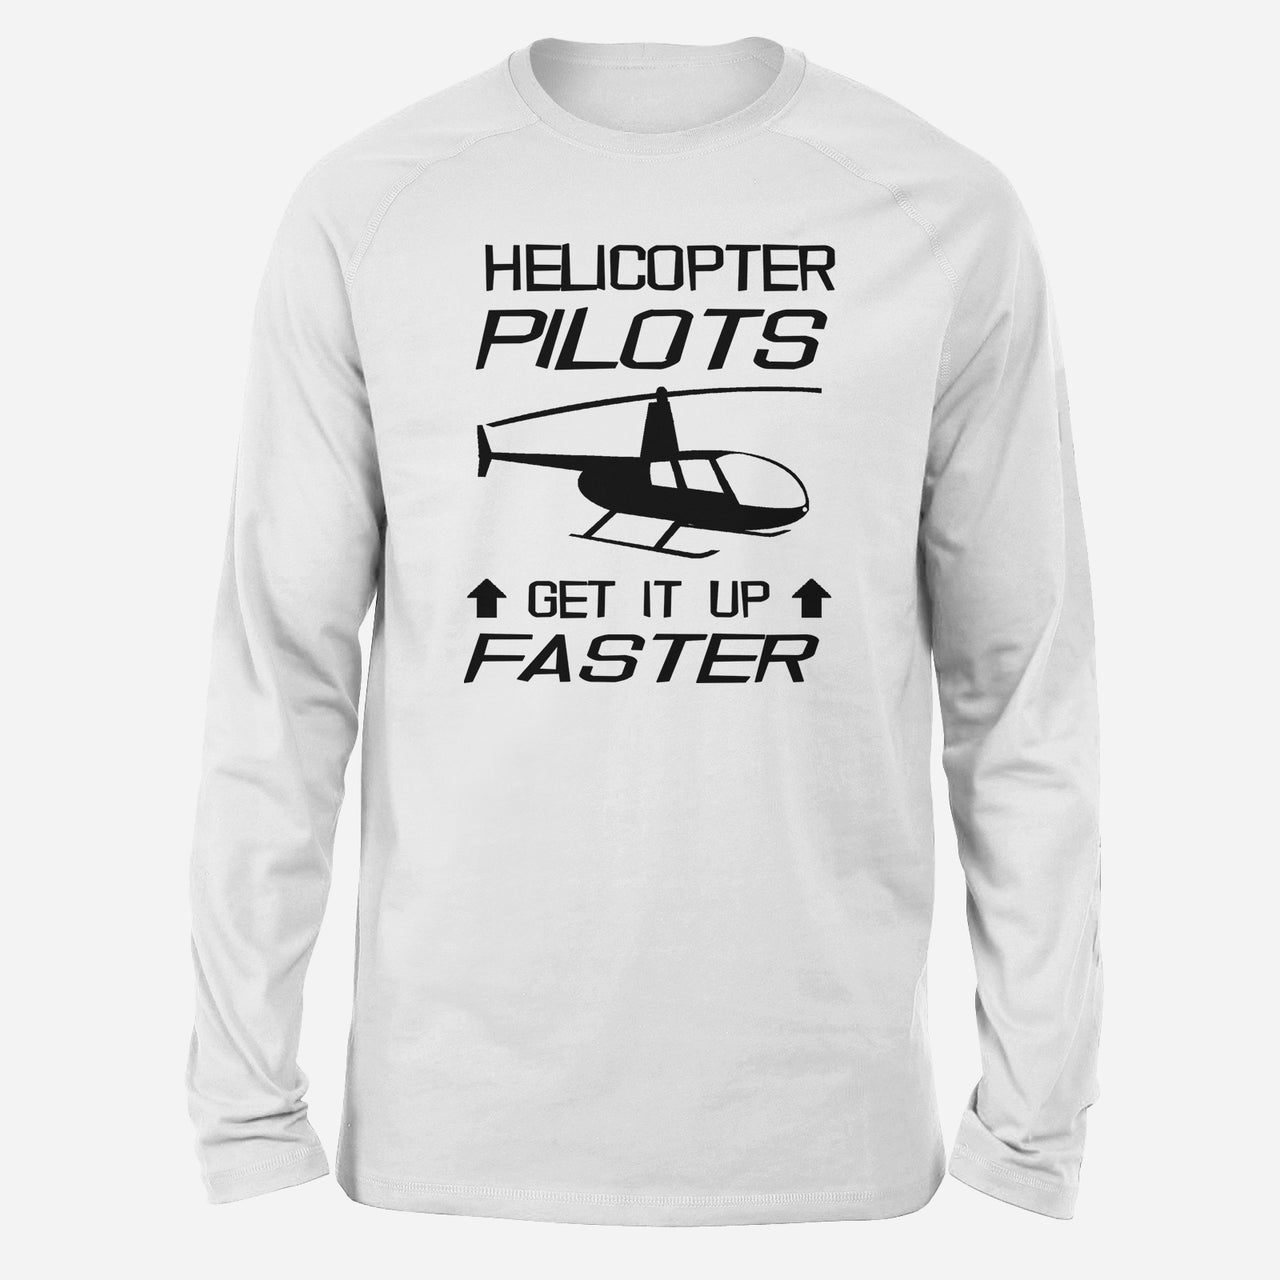 Helicopter Pilots Get It Up Faster Designed Long-Sleeve T-Shirts